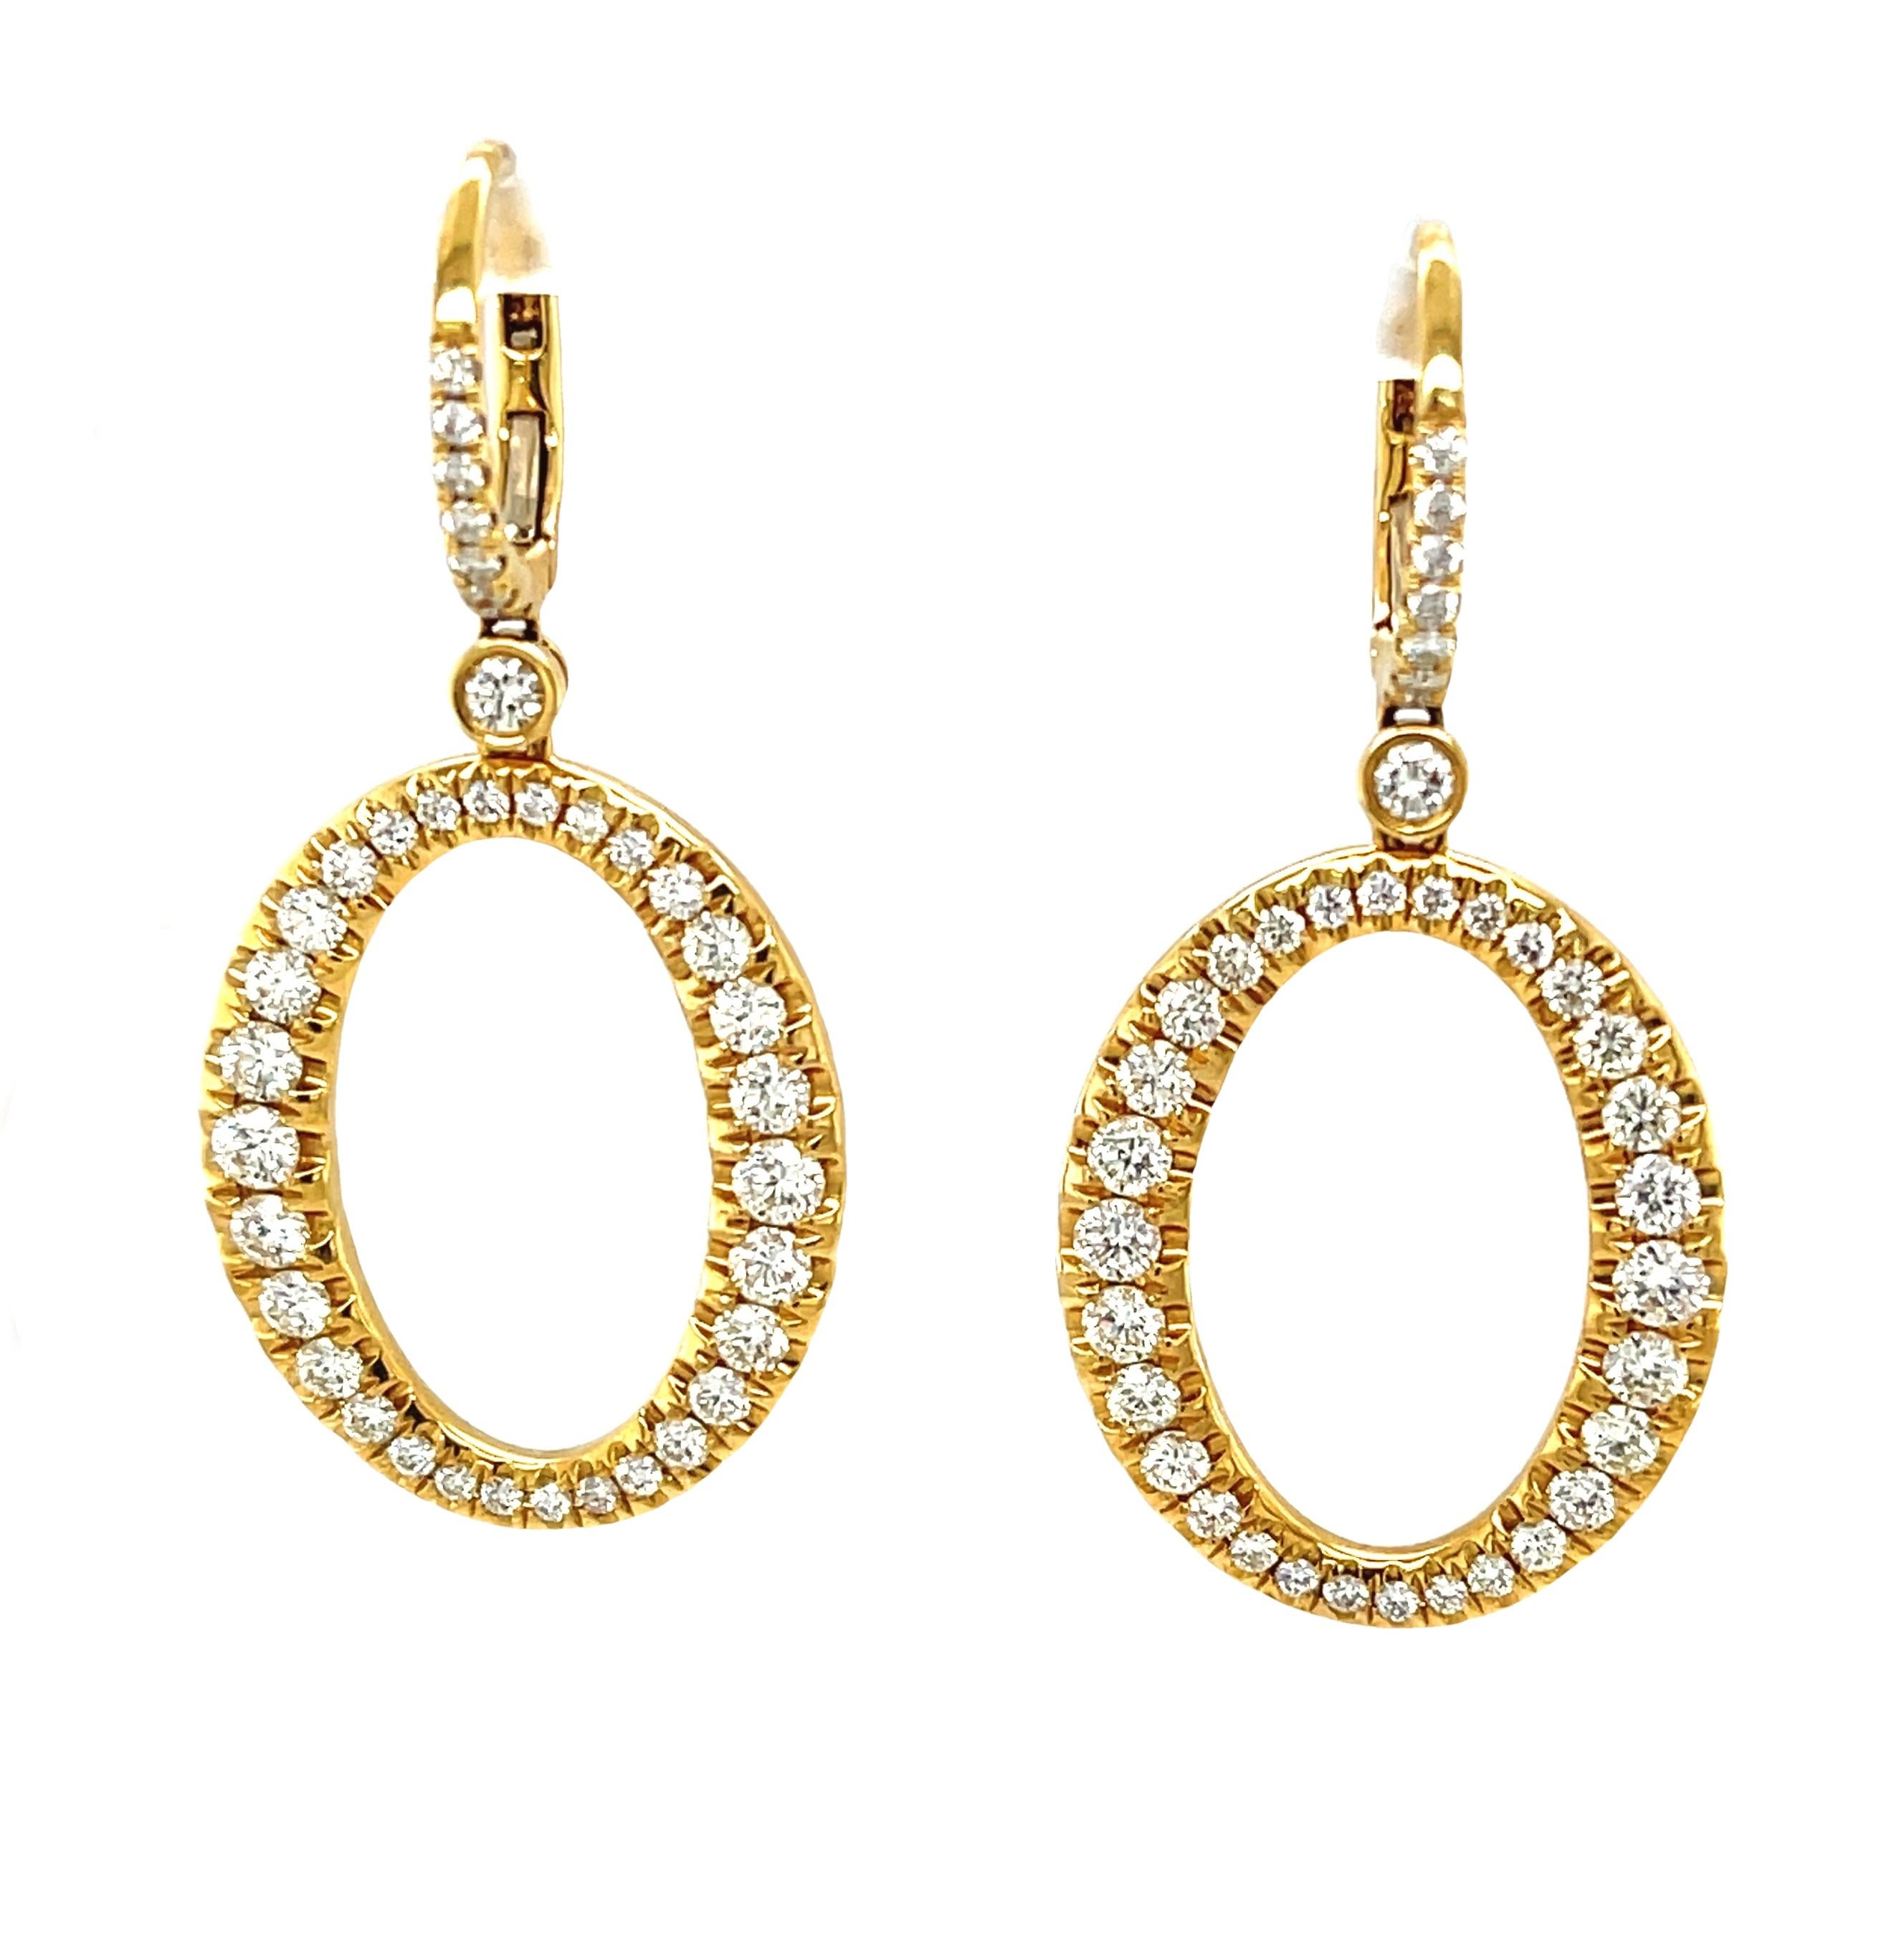 You are sure to hear, “Ooo…,” and “Ohhh…,” whenever you wear these gorgeous earrings set with over 2 carats of perfectly graduated brilliant cut diamonds. The unique design is especially eye-catching because it allows each diamond to be seen